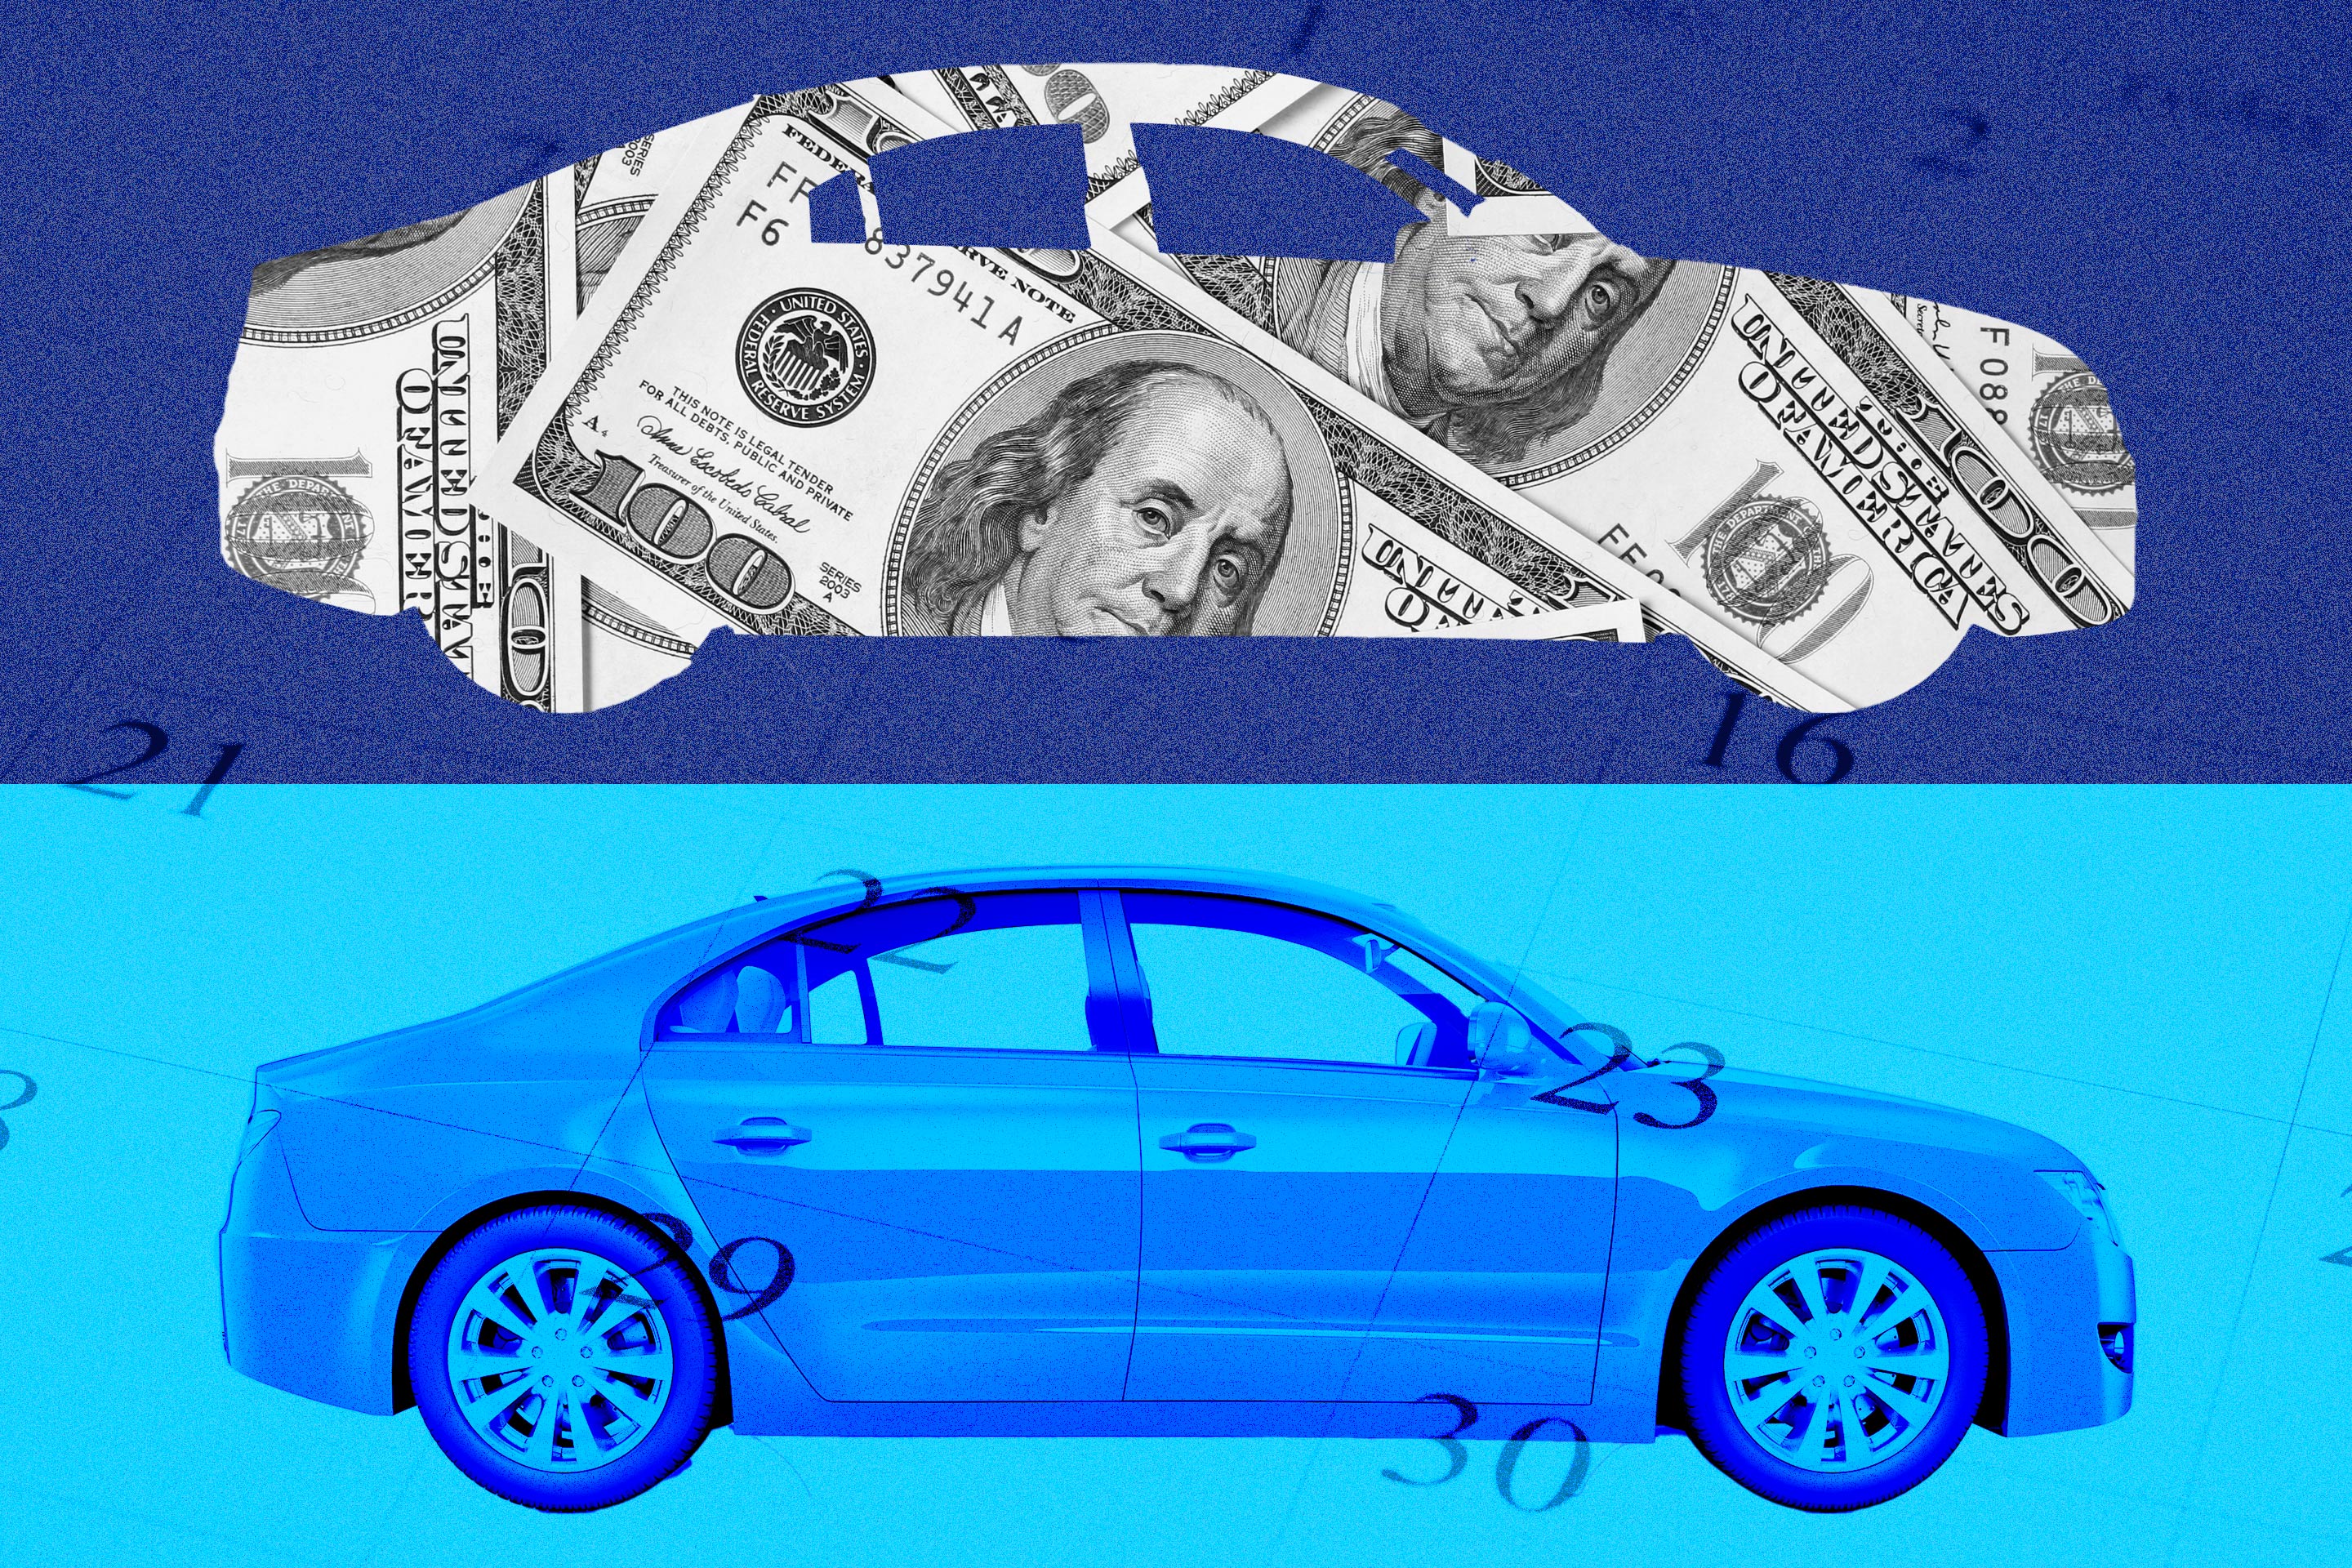 Car Insurance Rates Are Rising Faster Than Anything Else in the Economy